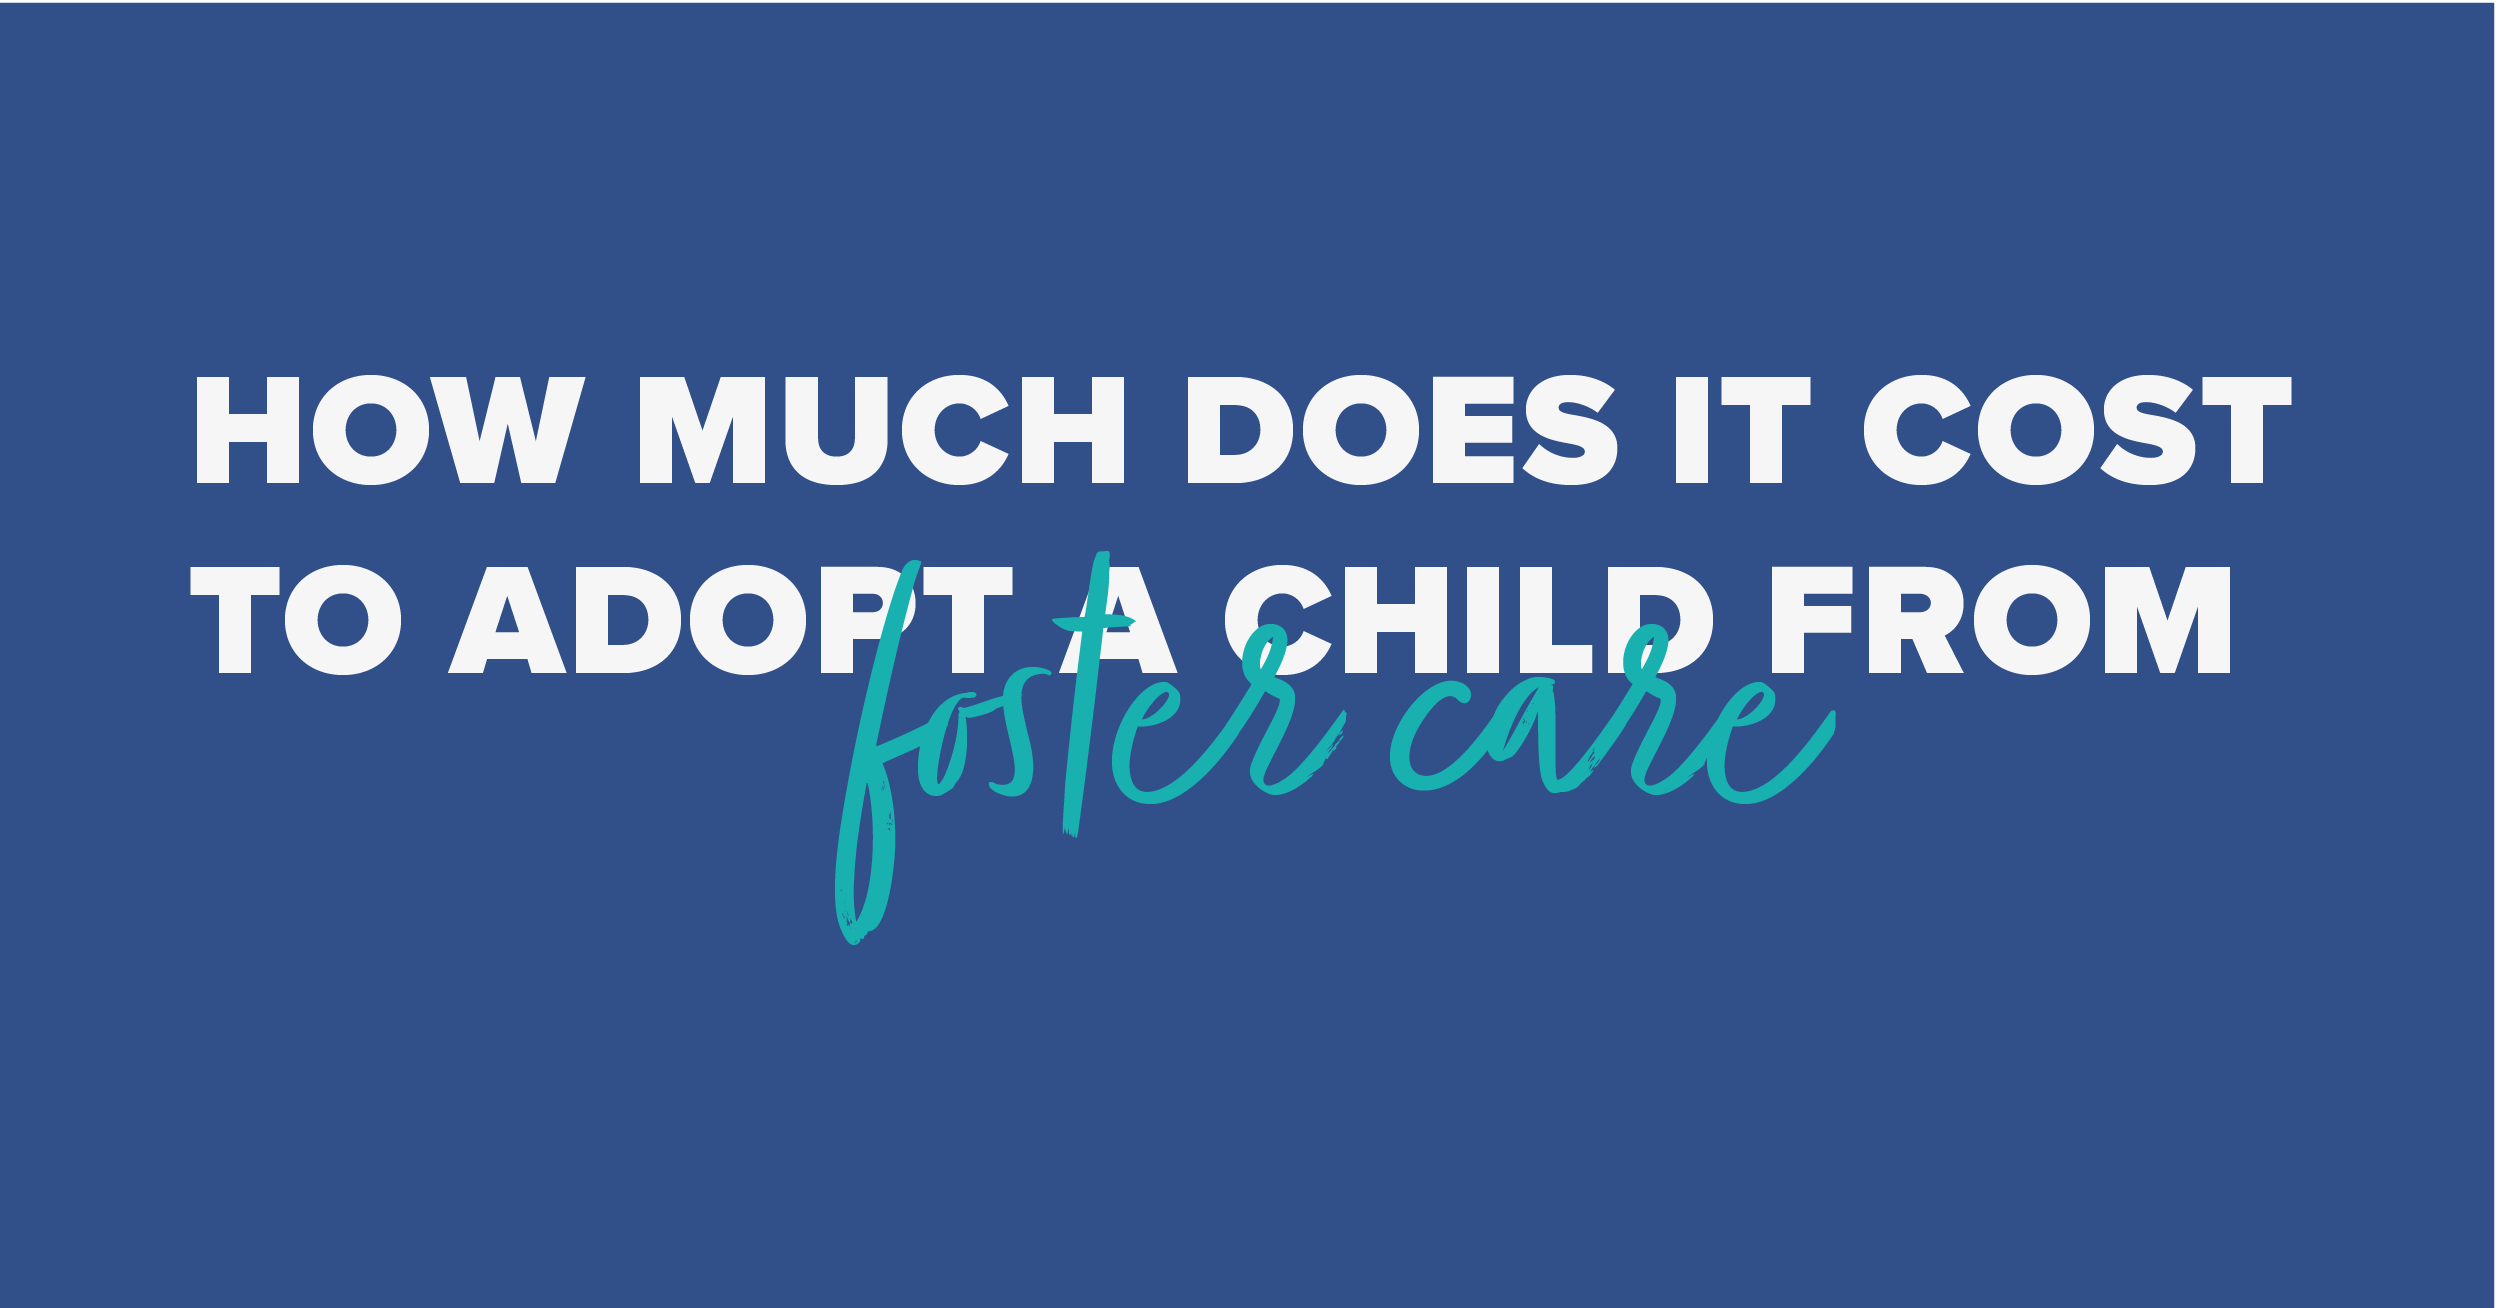 How Much Does It Cost to Adopt a Child From Foster Care?